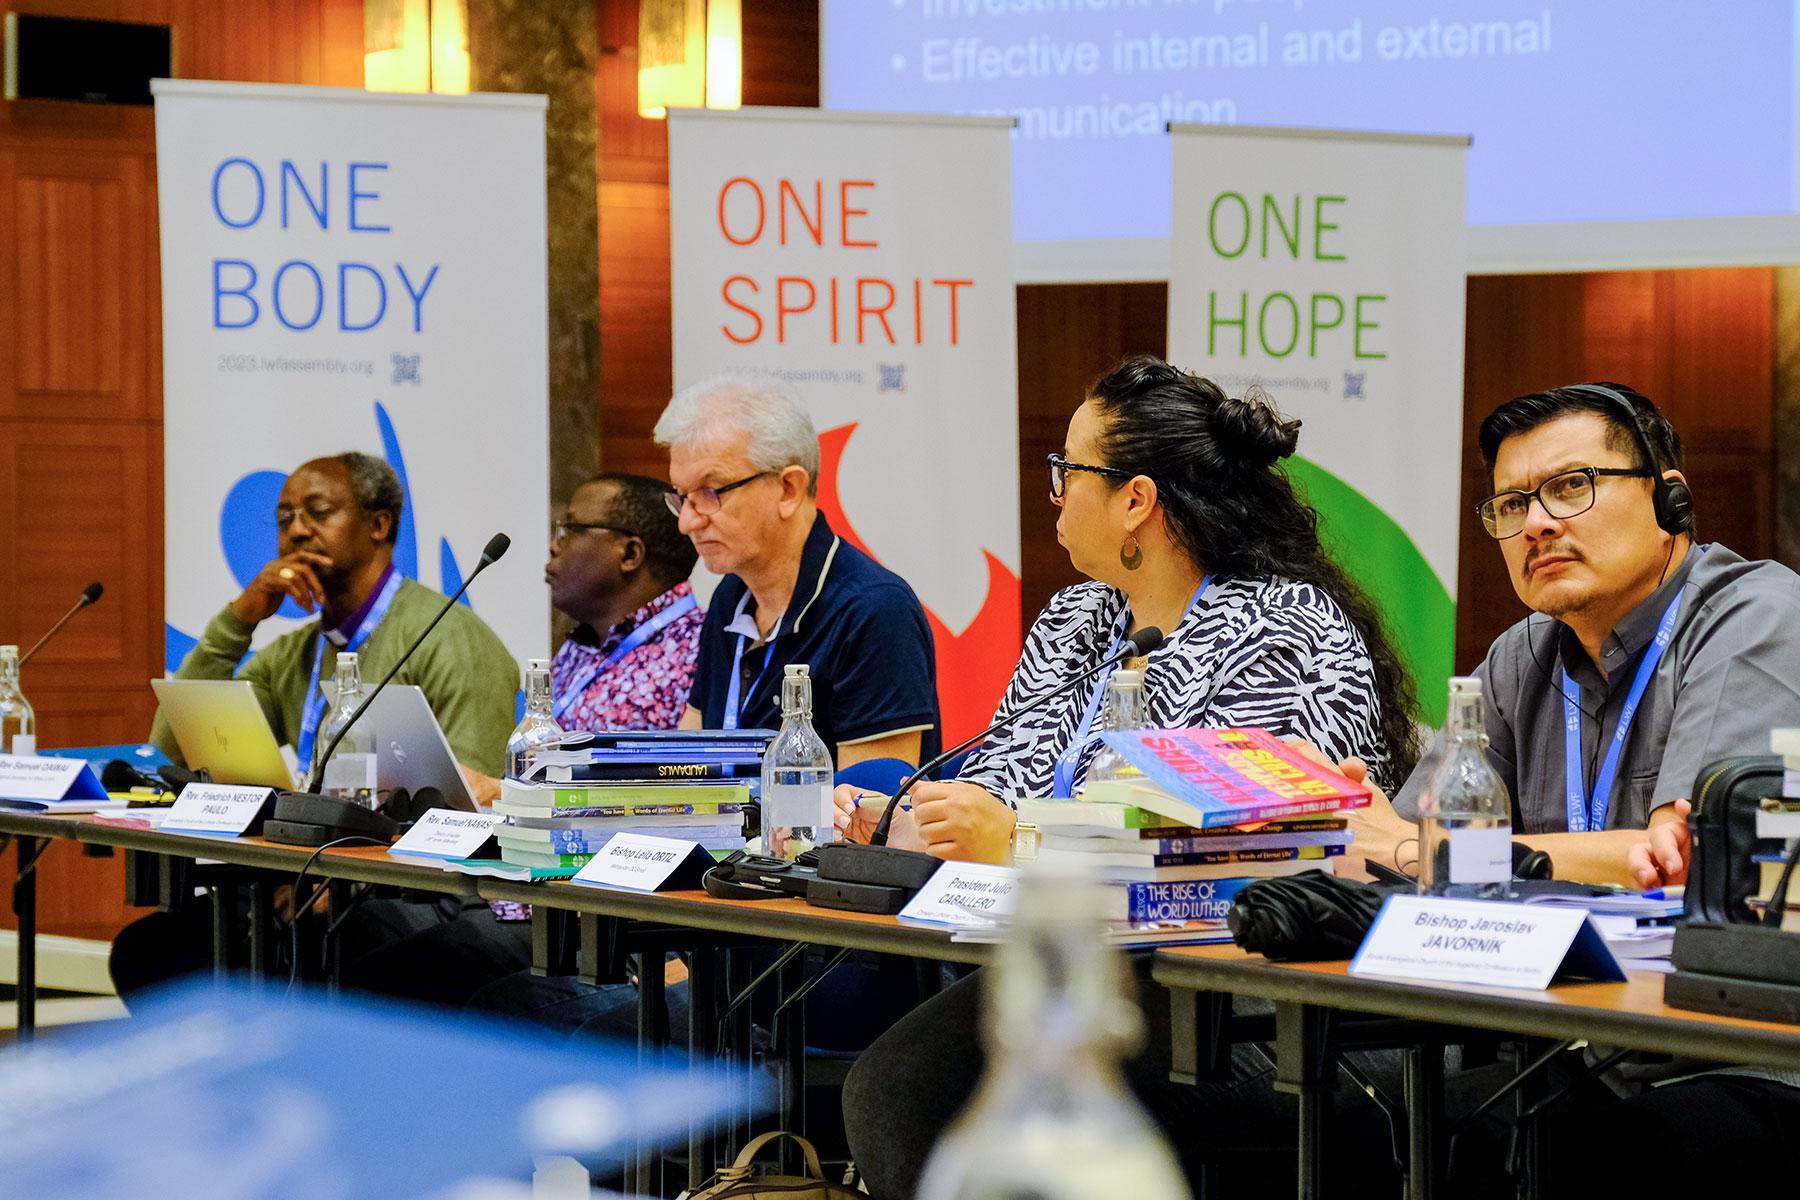 Participants in this year’s RoNEL included 16 LWF member church leaders from 13 countries. Seen here, from right: Pastor President Rev. Julio Caballero; (Honduras); Bishop Leila Ortiz (USA); Rev. Dr Nestor Paulo Friedrich (LWF Vice-President, LAC); Rev. Dr Sameul Dawai (Regional Secretary, Africa) and Bishop Johnes Meliyio (Kenya). Photo: LWF/A. Danielsson